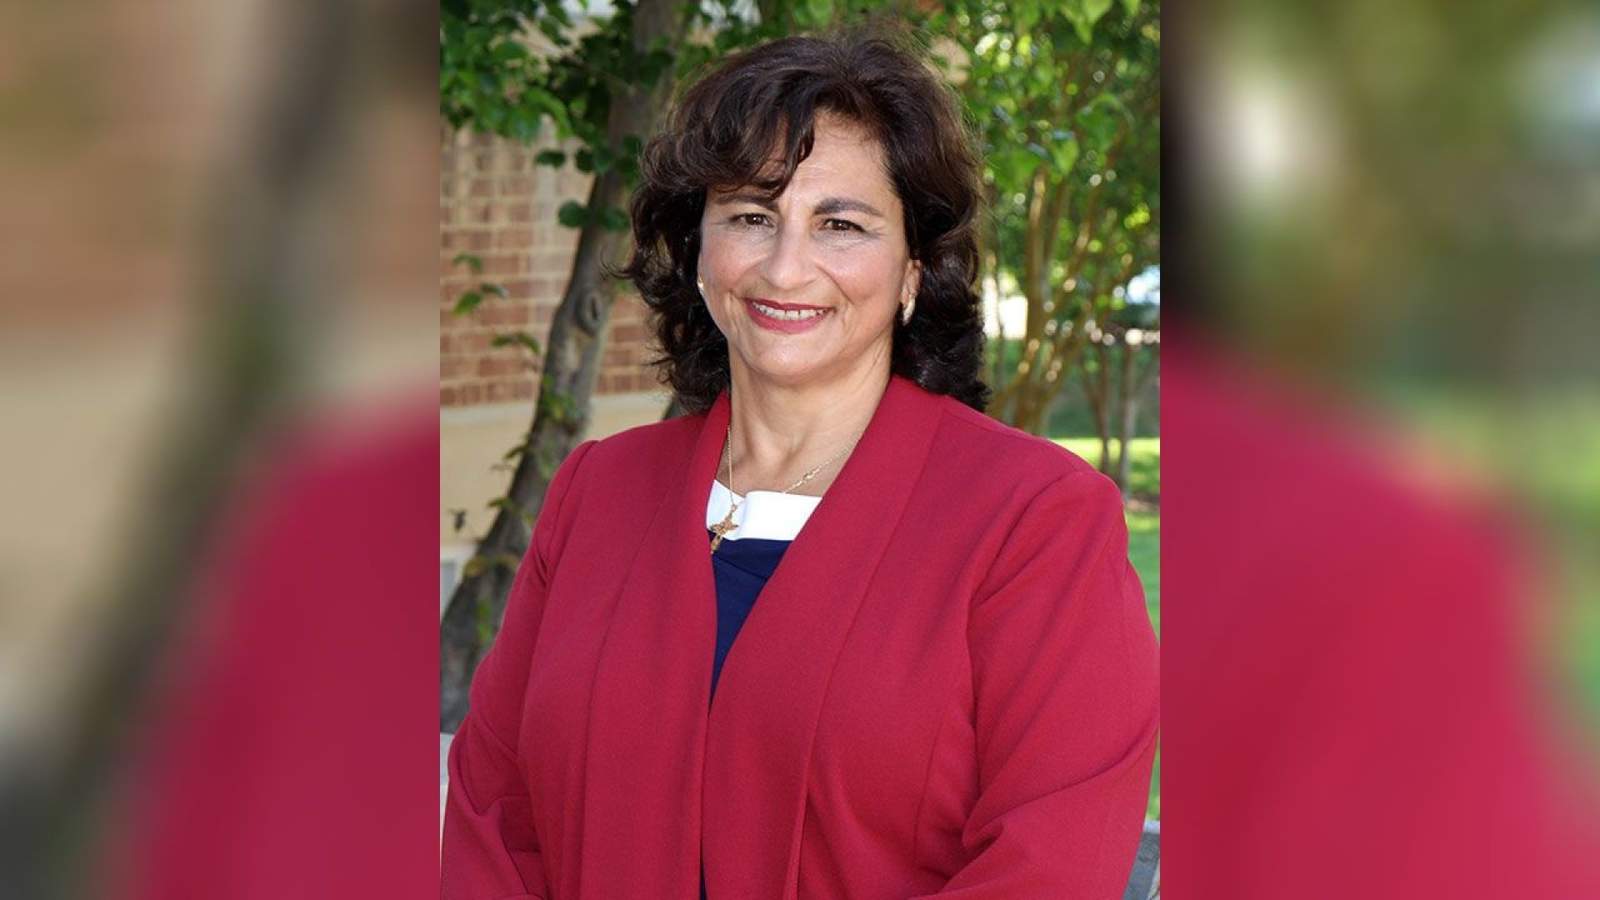 Salem elects its first-ever female mayor